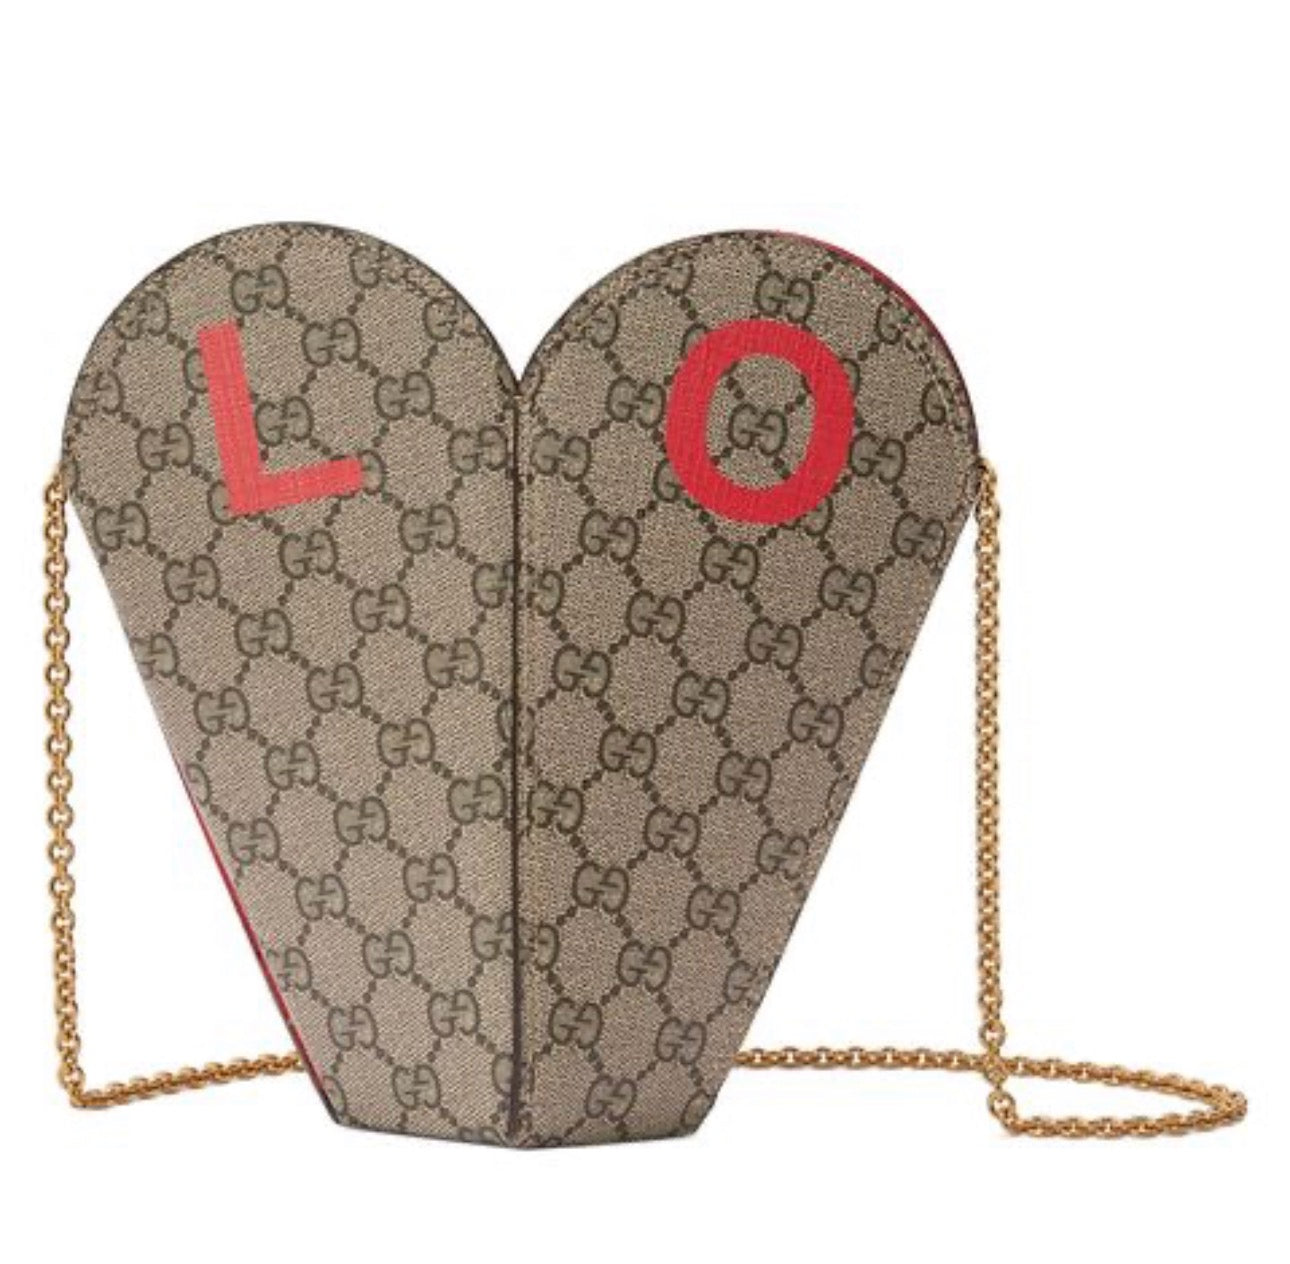 BEST Heart Shaped BAGS for VALENTINES day!- LOUIS VUITTON, PRADA